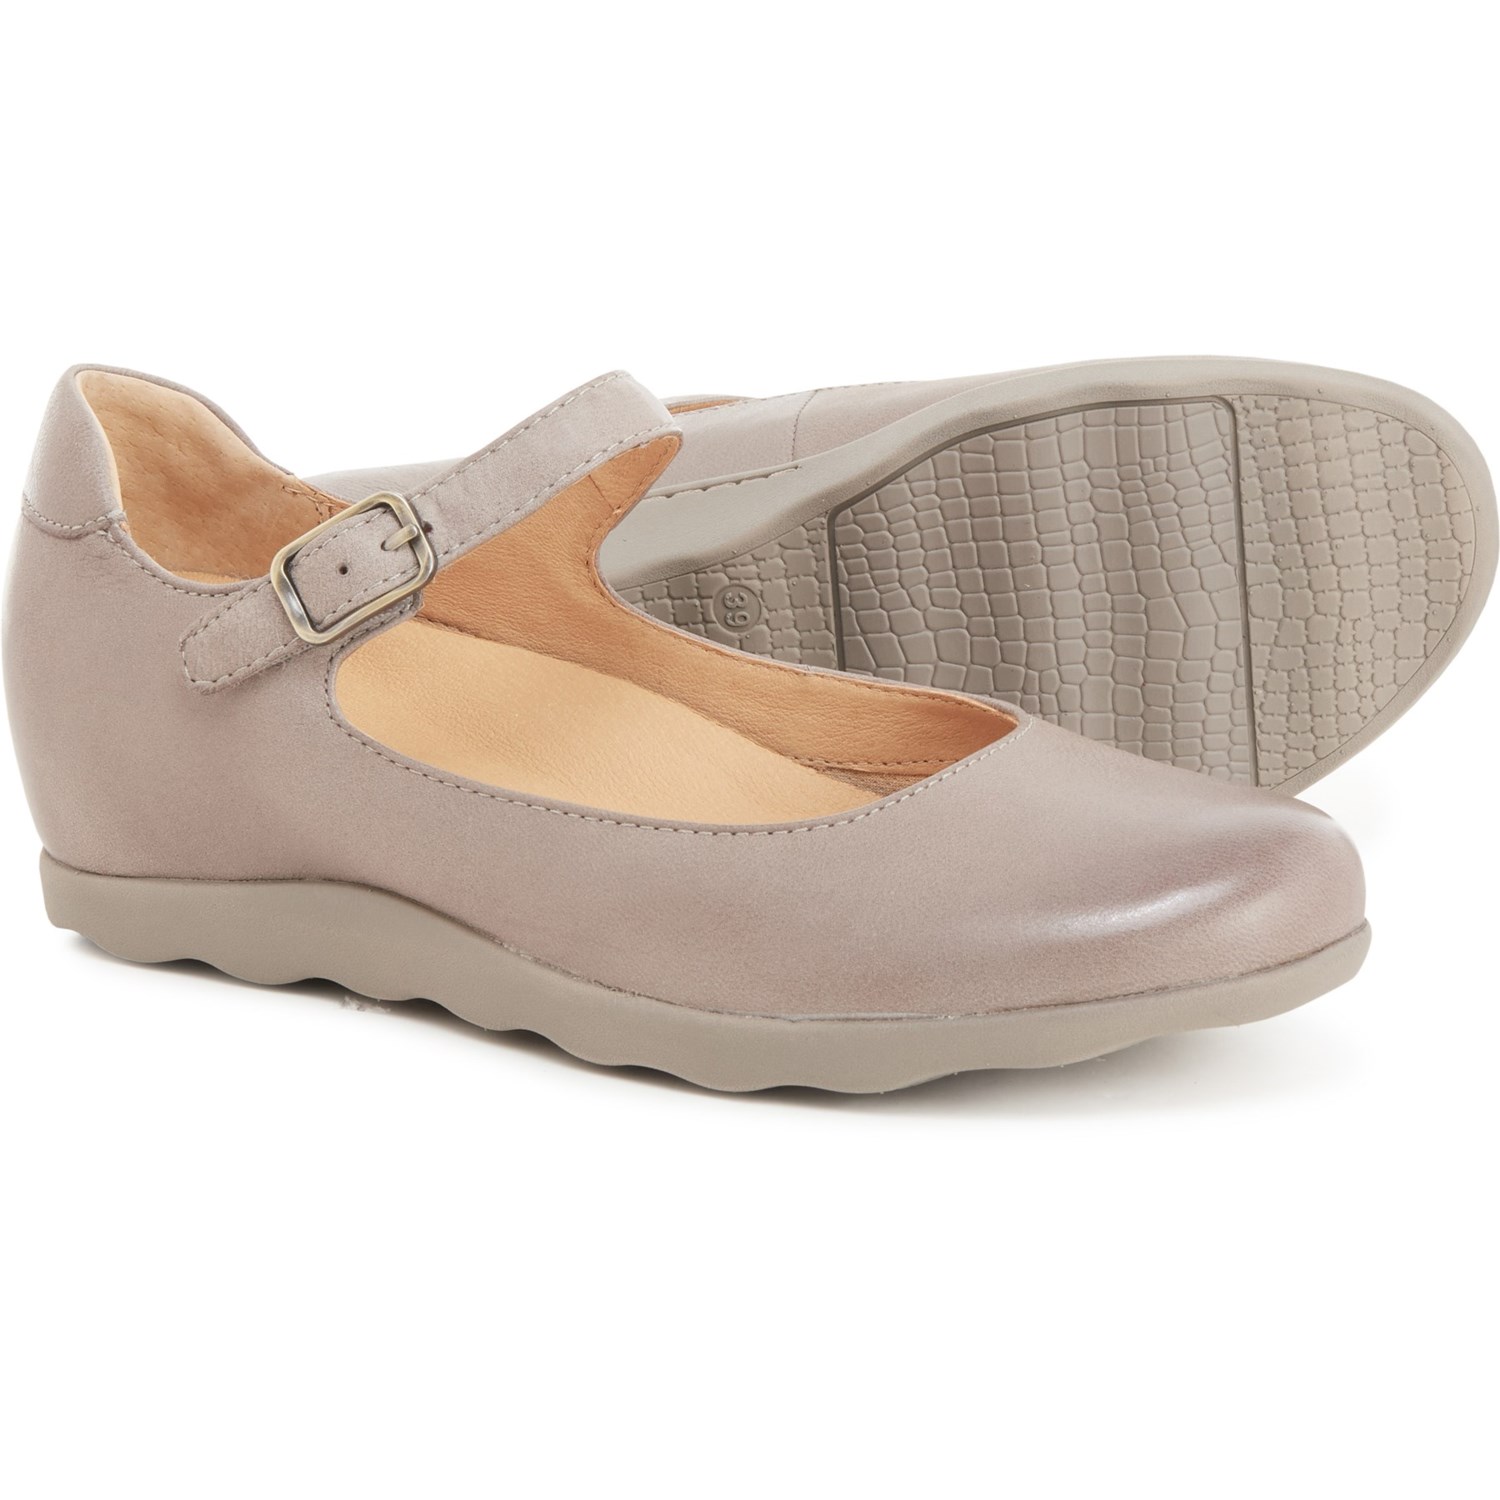 Dansko Marcella Mary Jane Shoes (For Women) - Save 49%